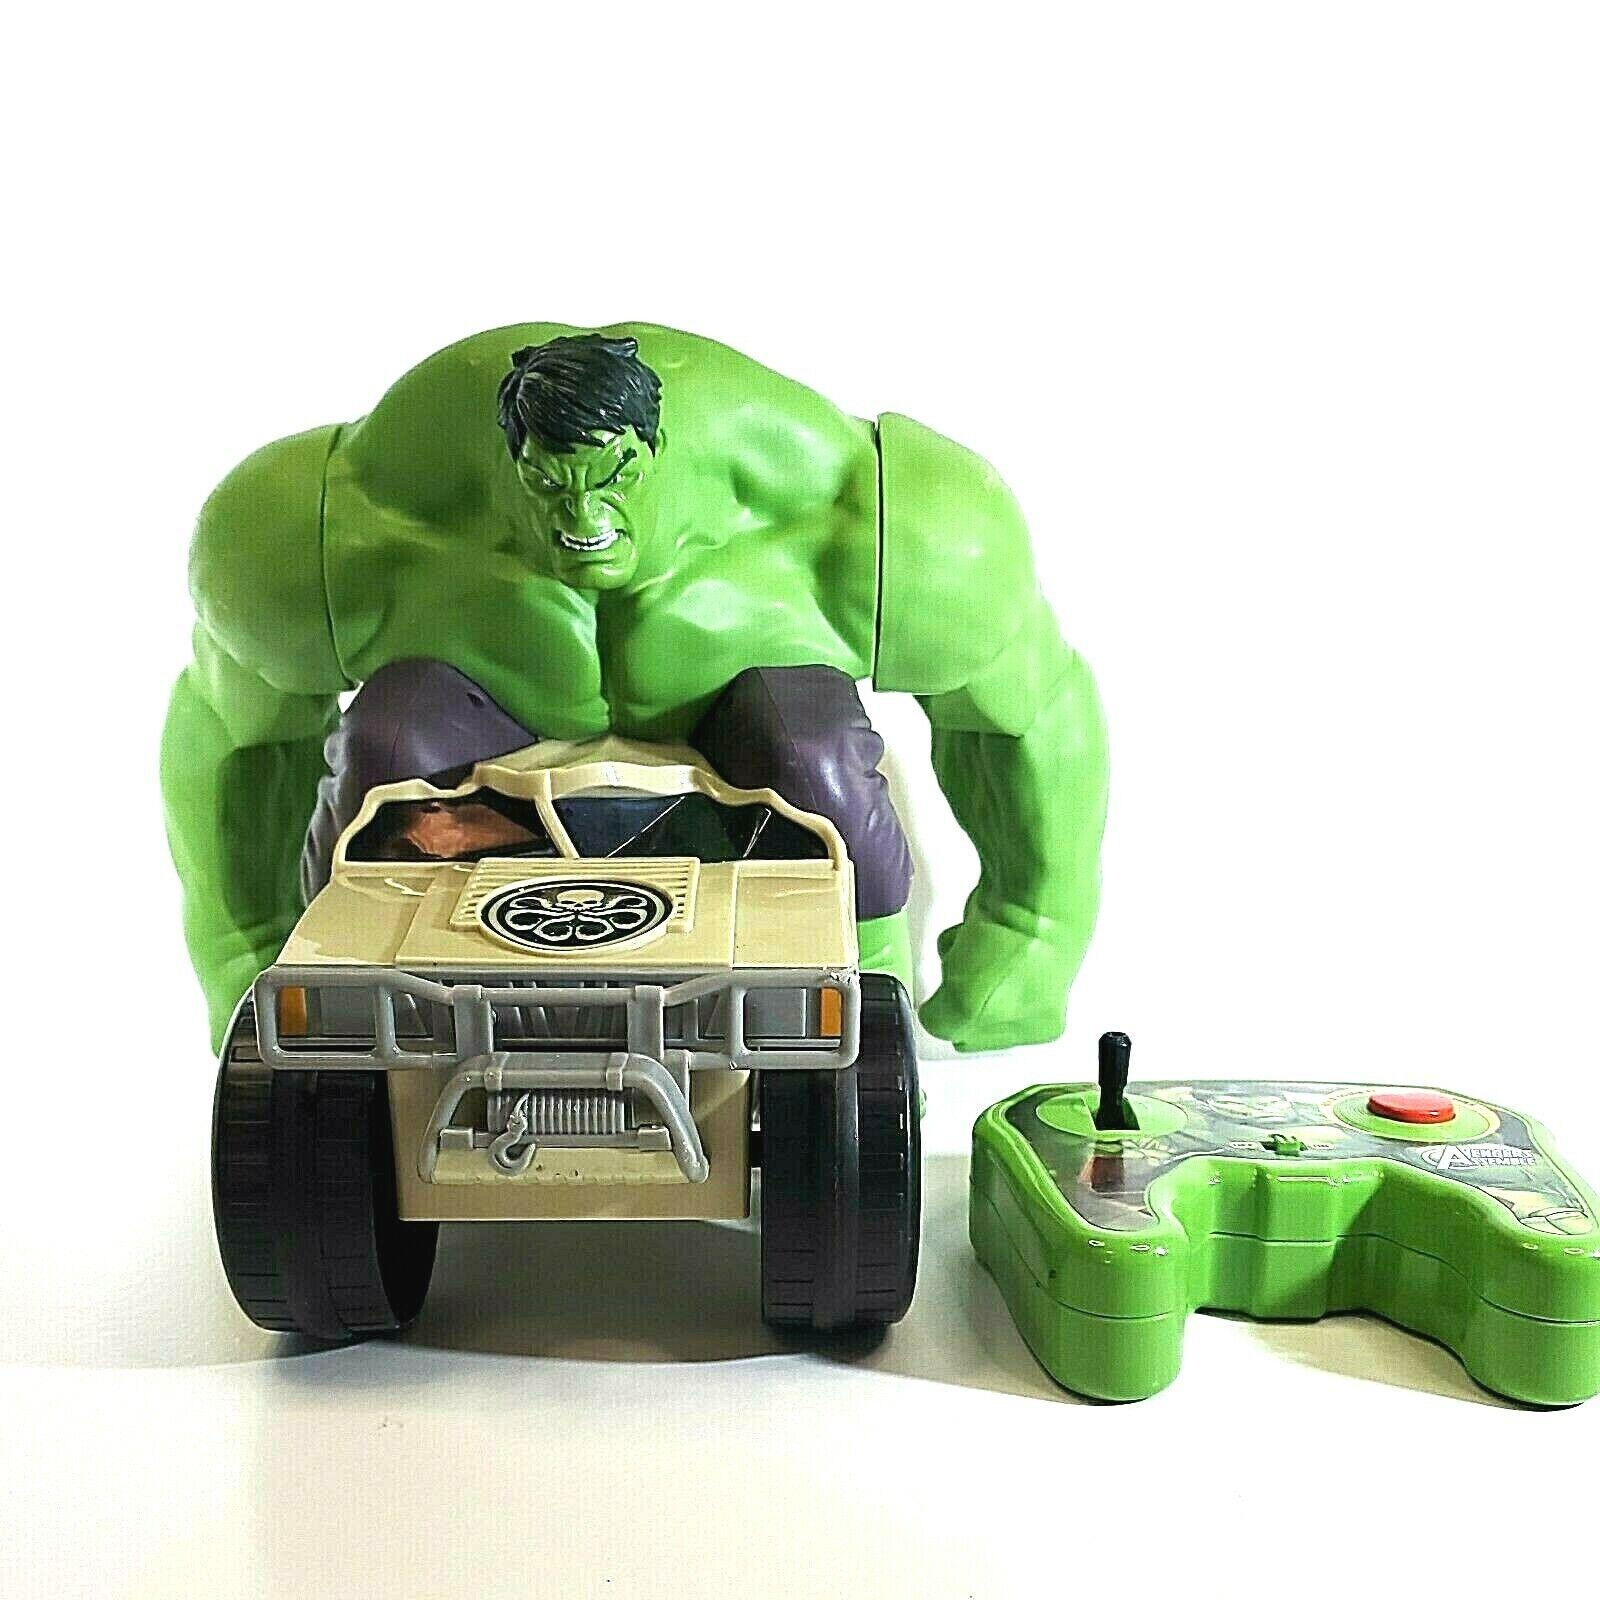 Hulk Rc Car: Facts About Hulk RC Car's History and Popularity